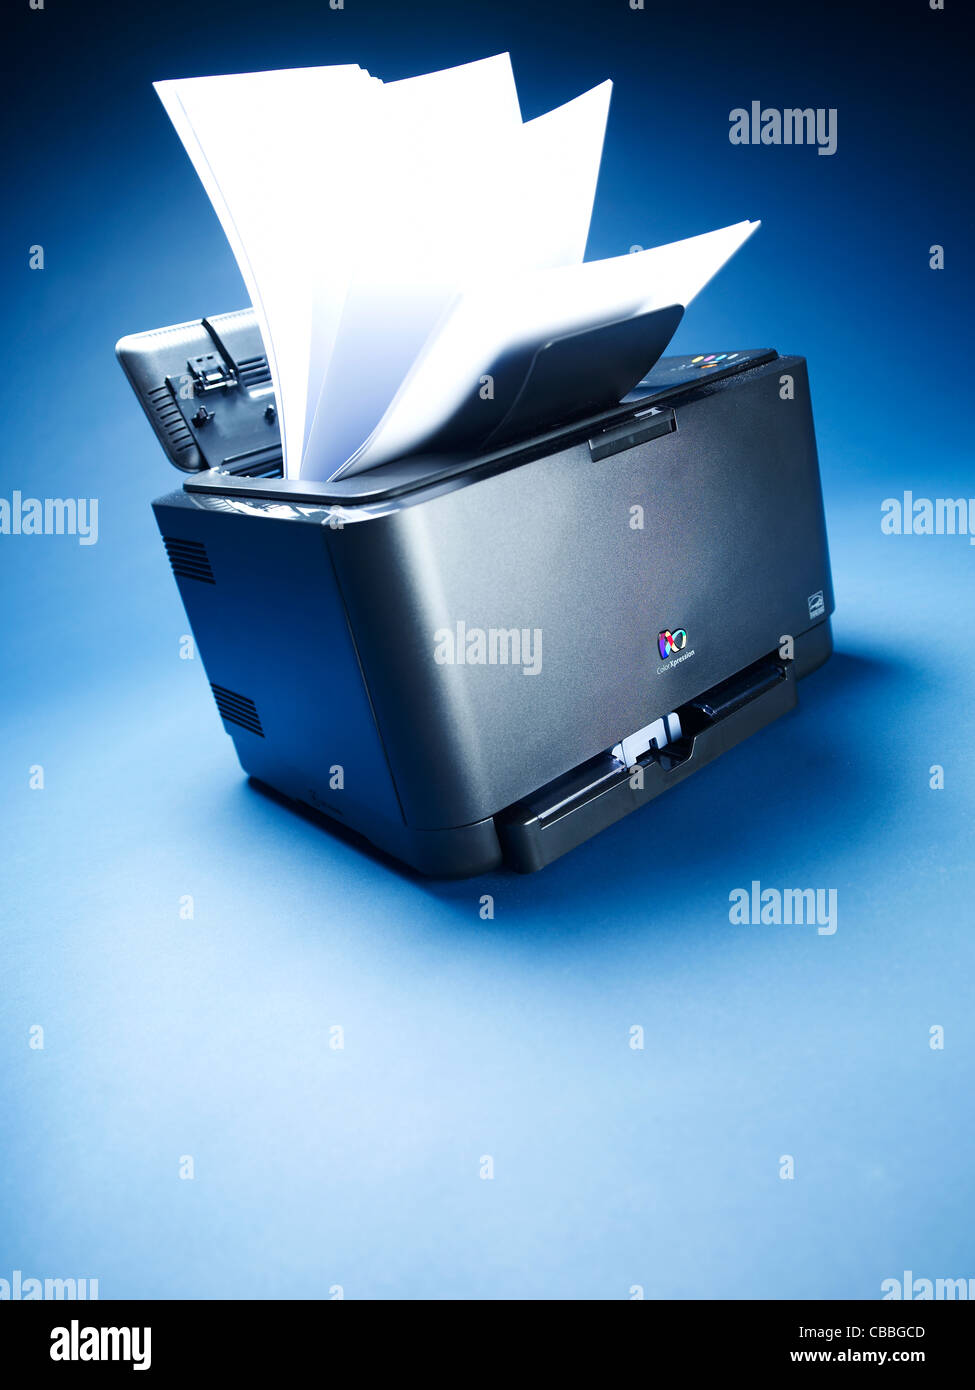 Printer with paper flying out Stock Photo